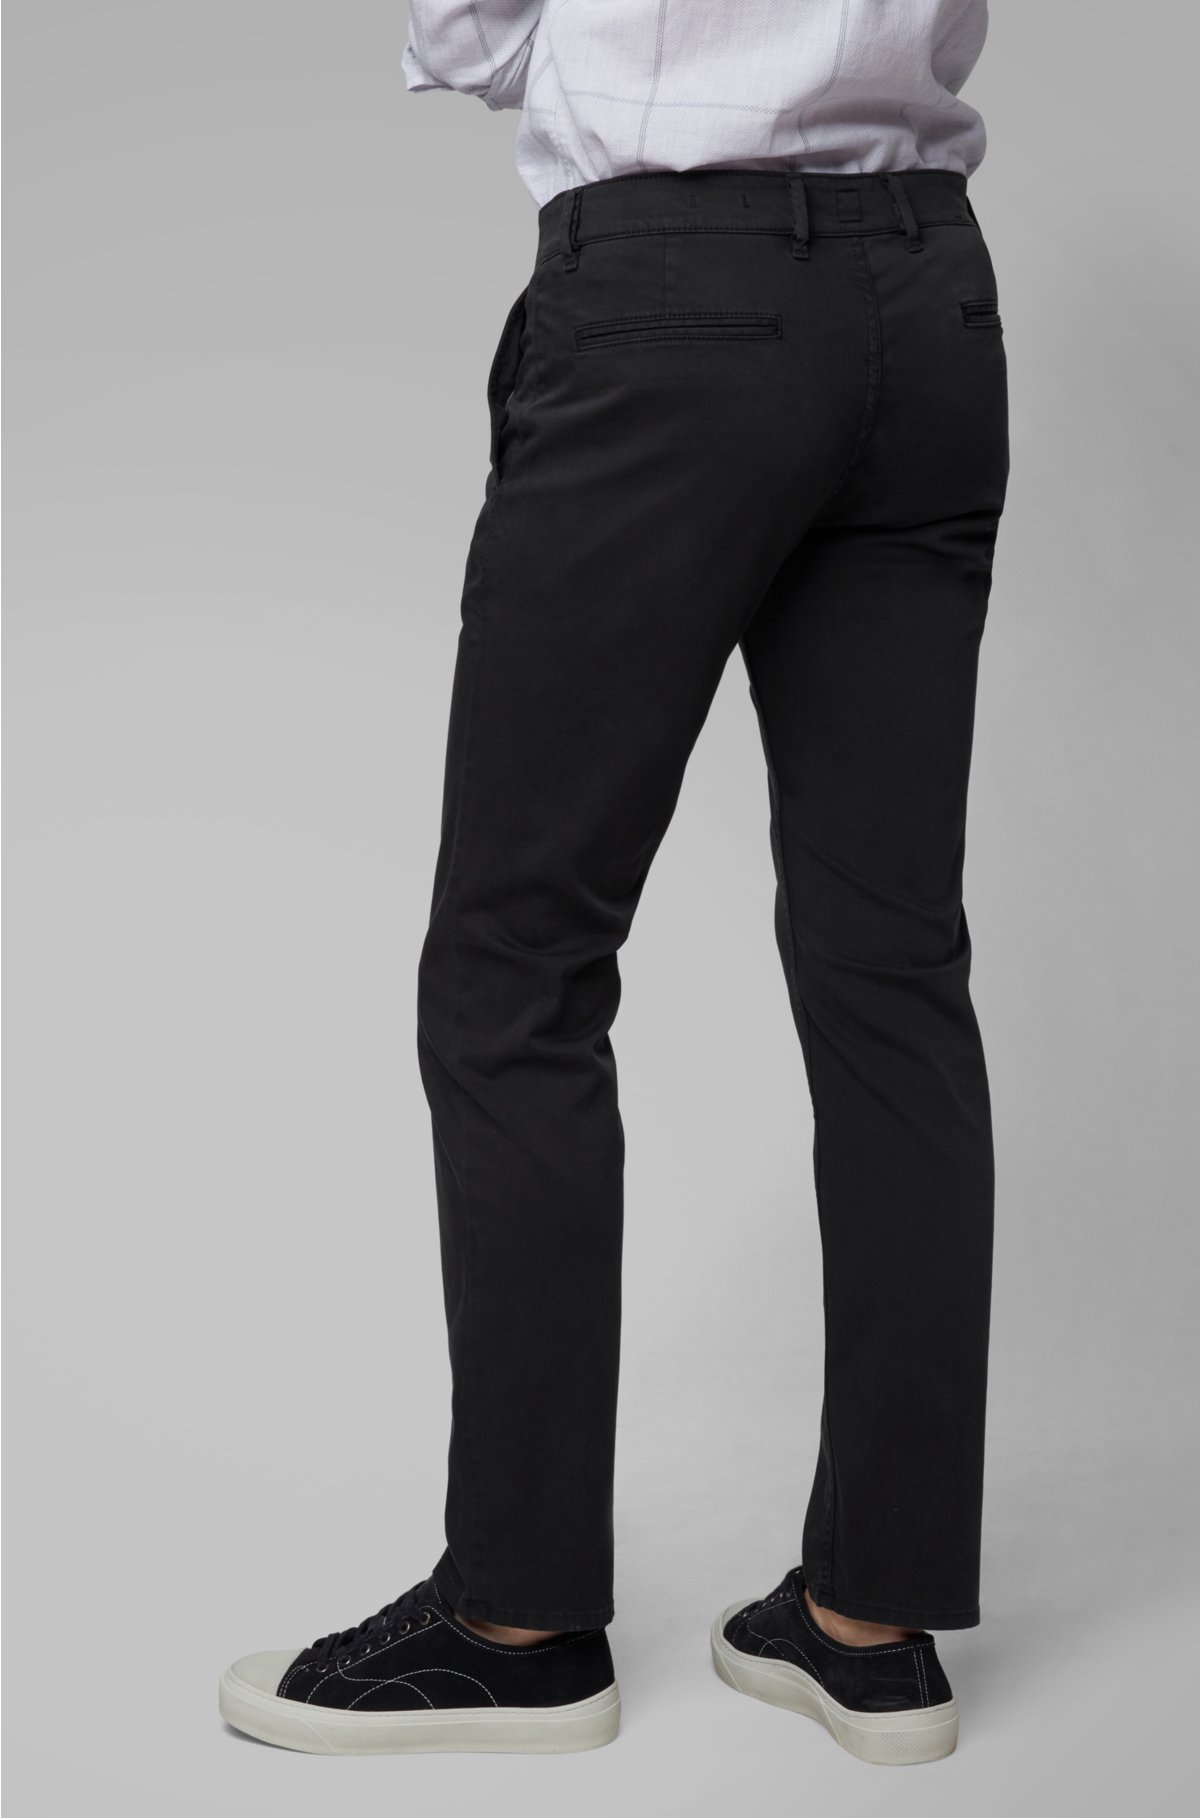 - Slim-fit in chinos cotton brushed BOSS casual stretch